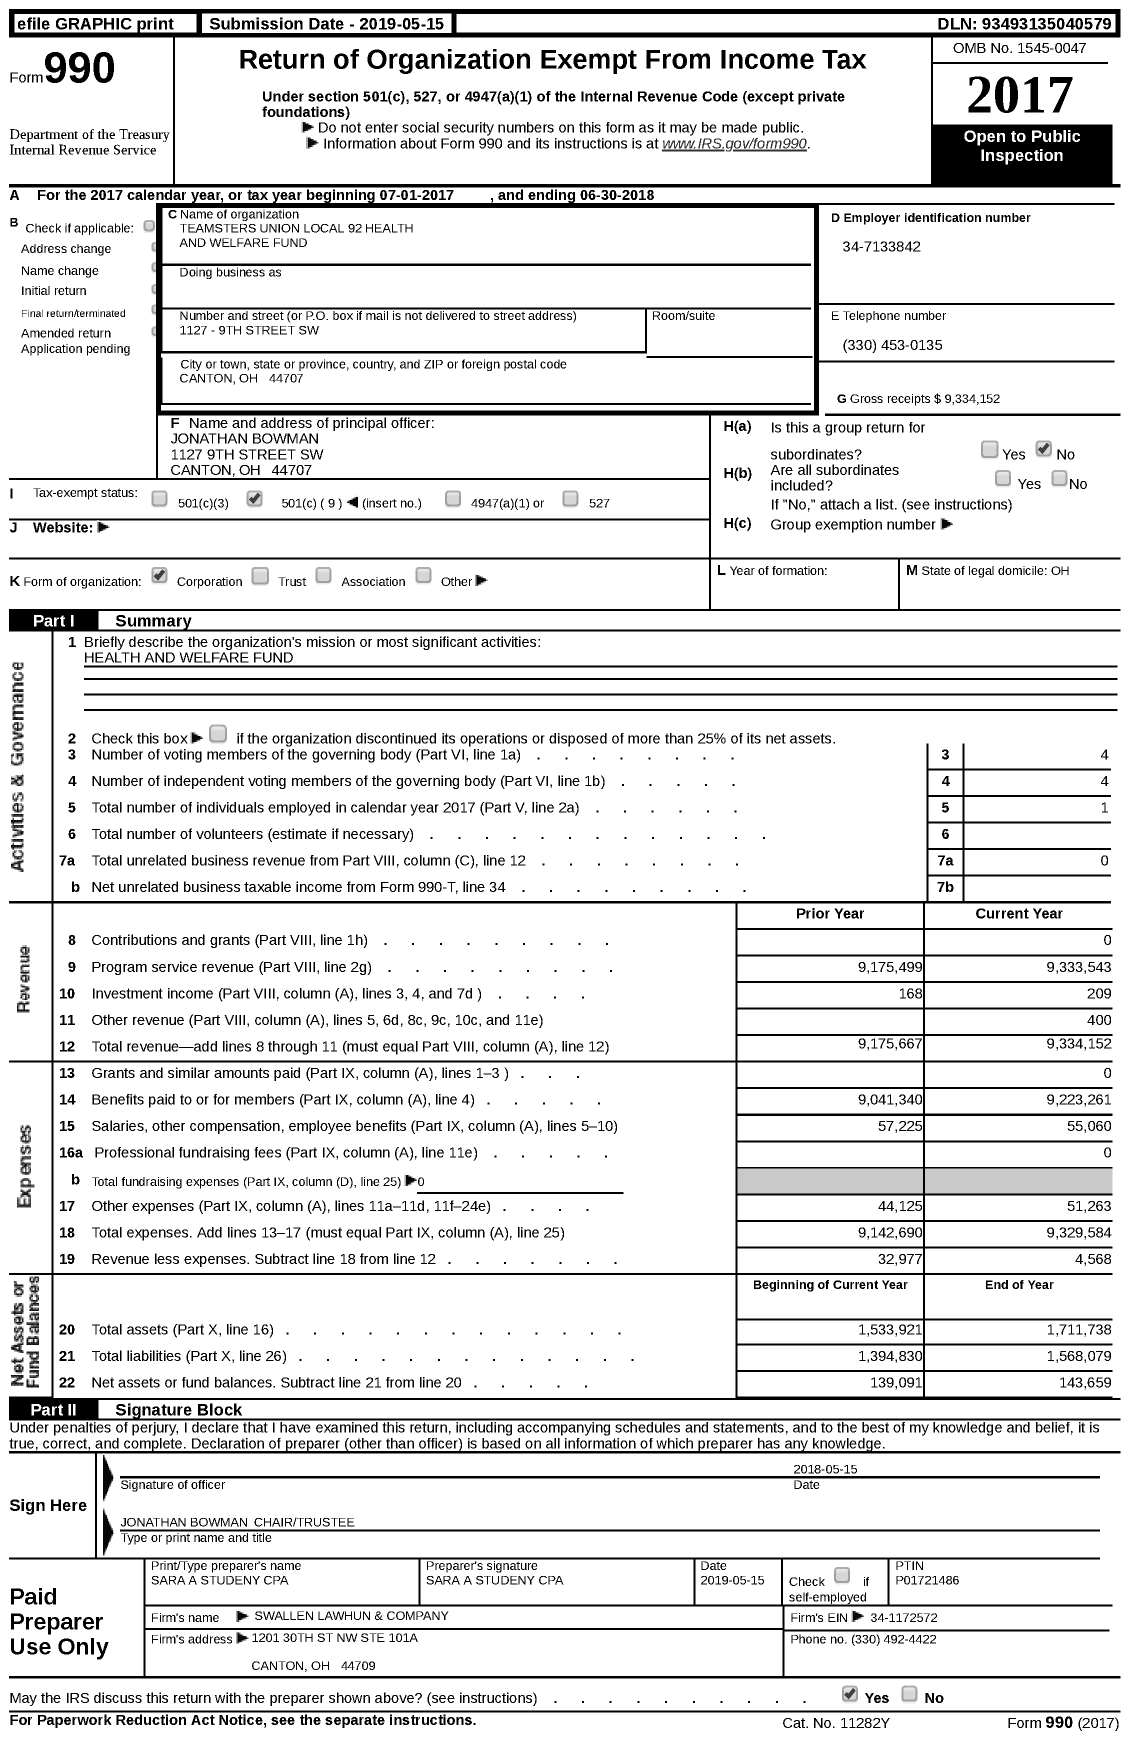 Image of first page of 2017 Form 990 for Teamsters Union Local 92 Health and Welfare Fund